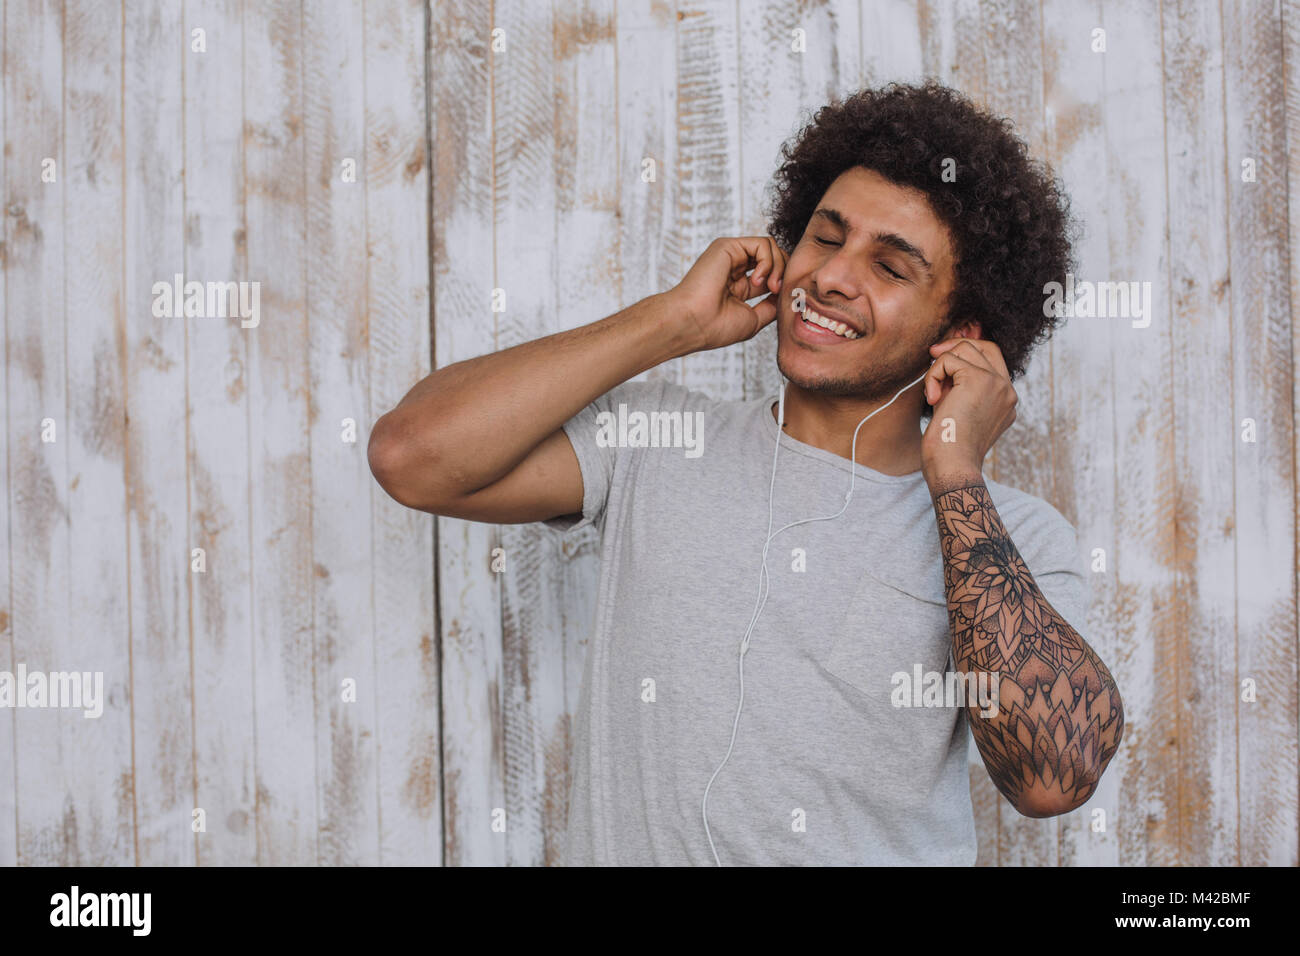 enjoy the sound. Mulatto man, with curly hair wearing headphones, closed his eyes and smiling against retro wooden wall Stock Photo